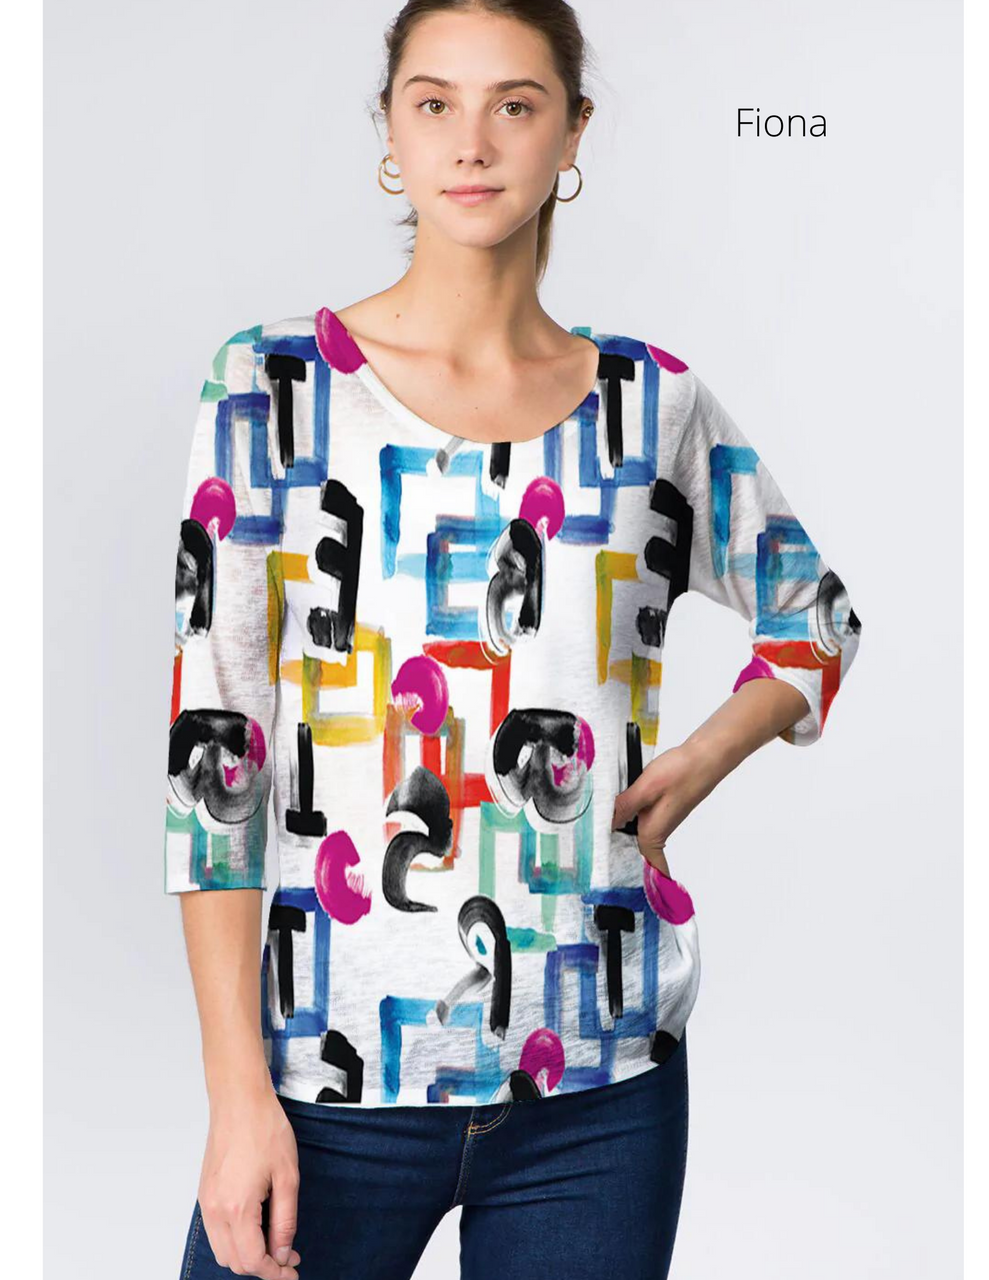 025- ET Lois Bright Watercolor Knit 3/4 Sleeve Top